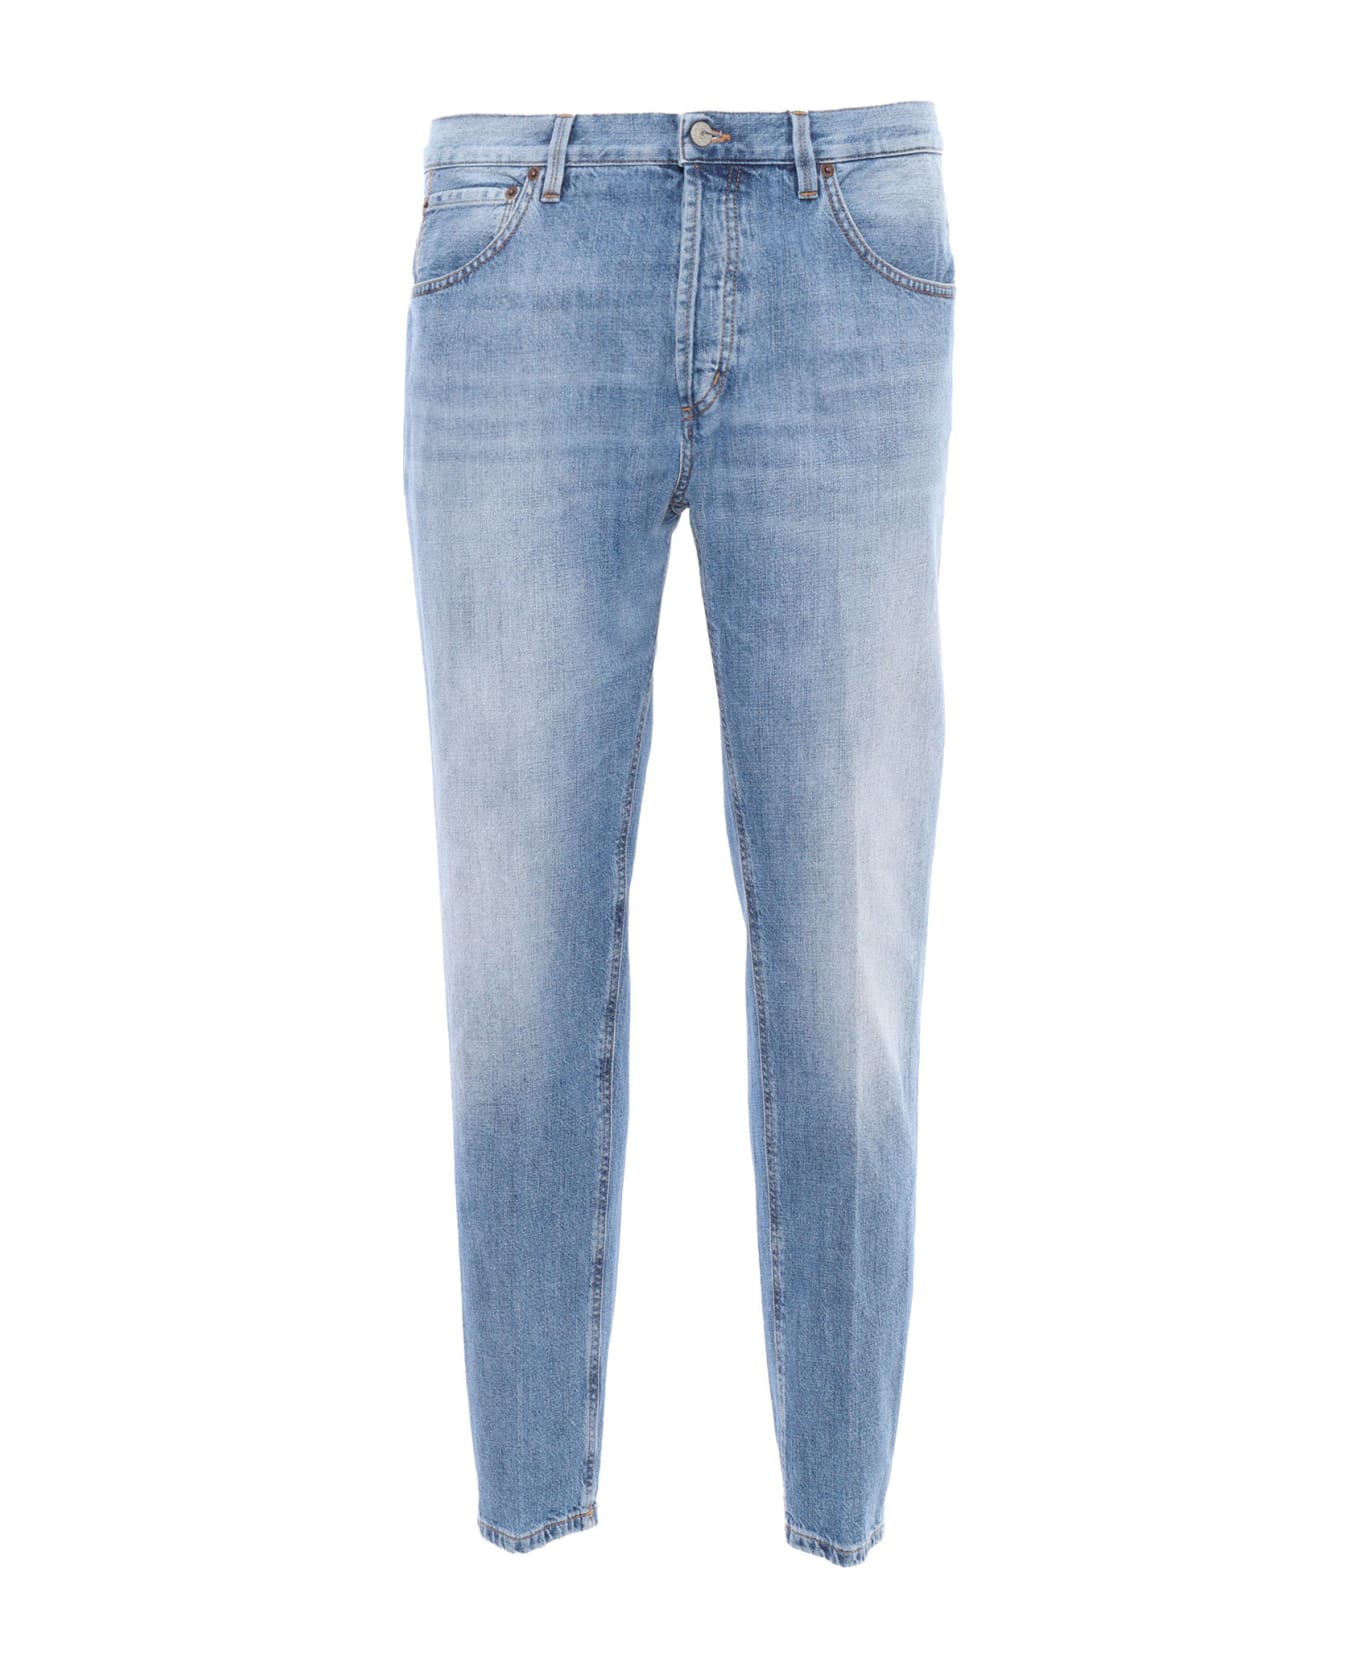 Dondup Washed Effect Jeans - Blu